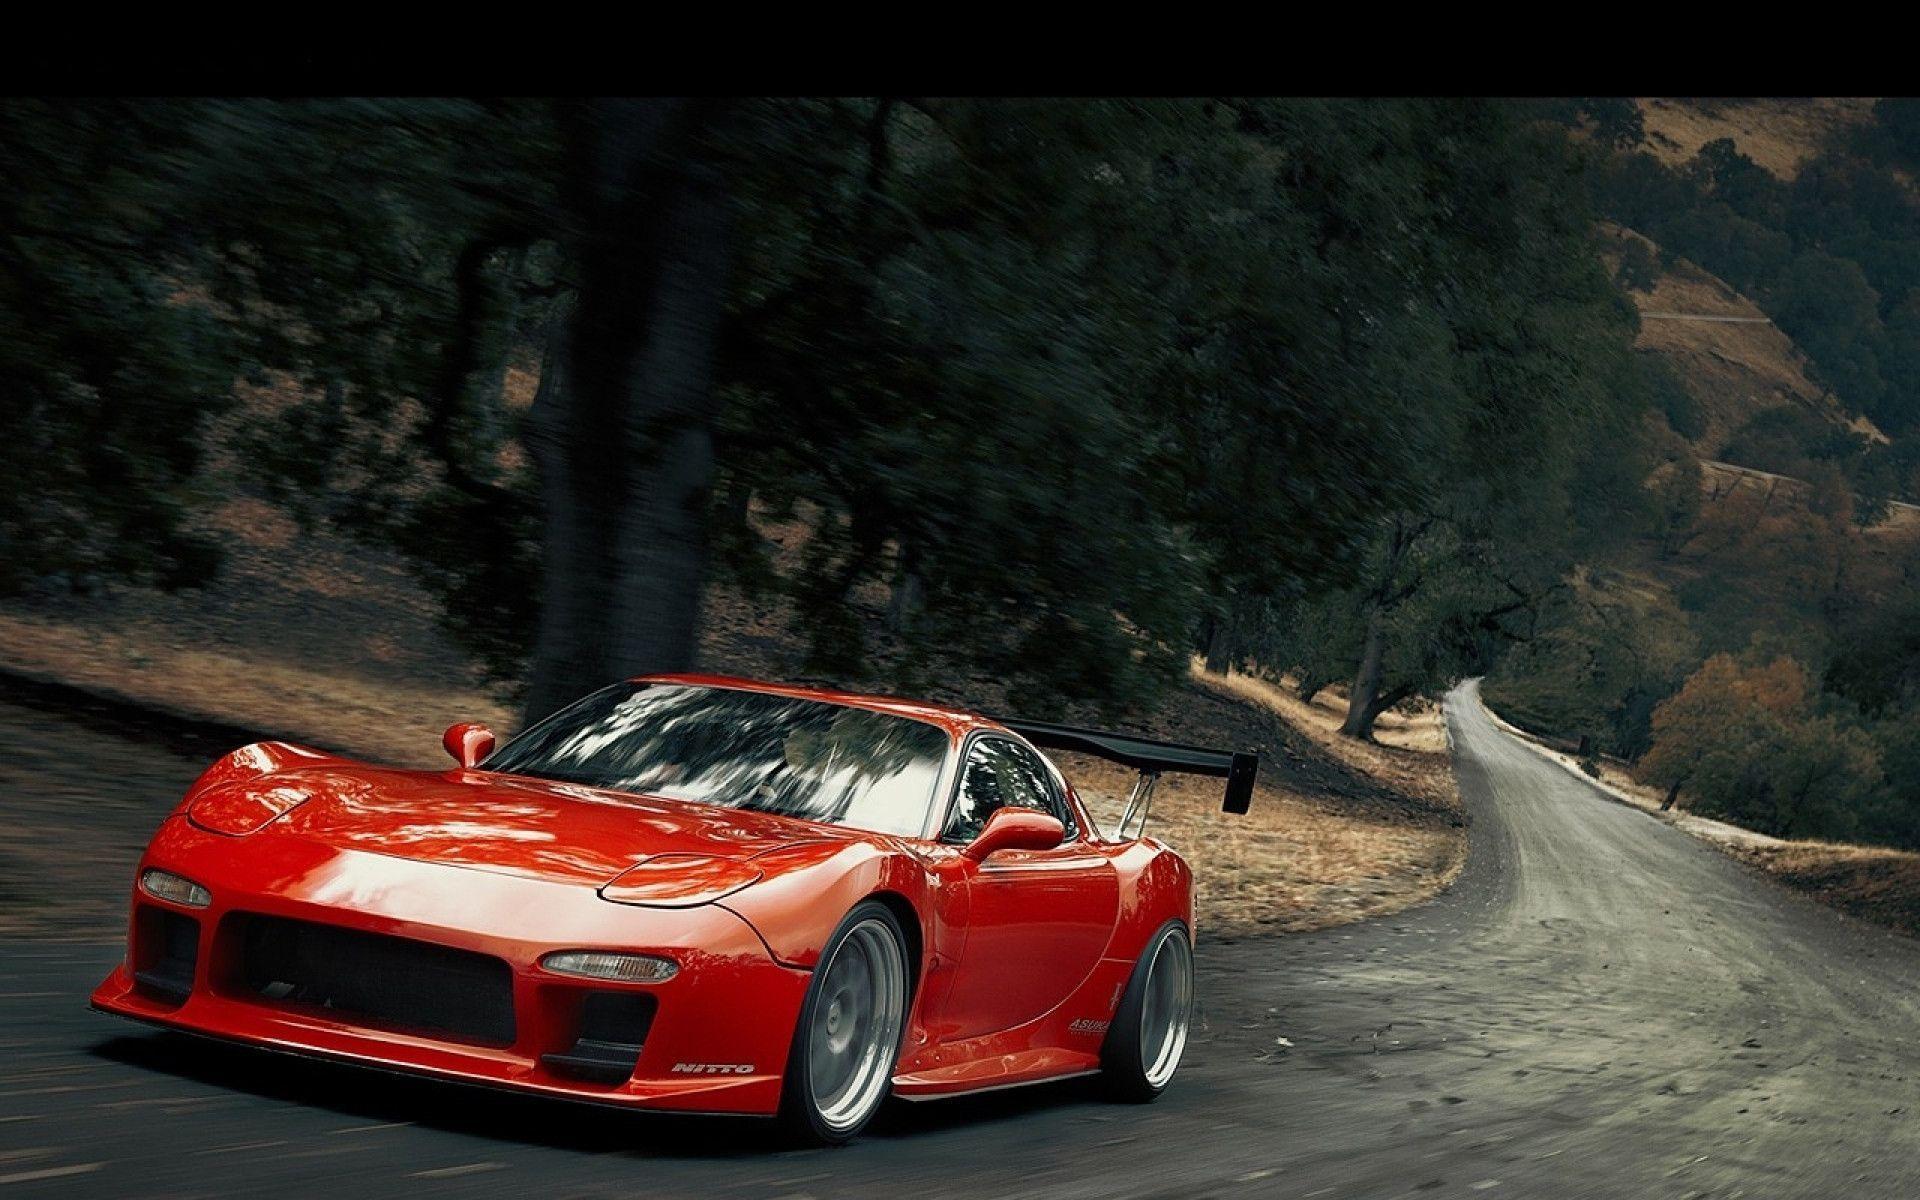 Download wallpaper 1350x2400 mazda rx7 mazda car blue drift asphalt  mountains iphone 876s6 for parallax hd background